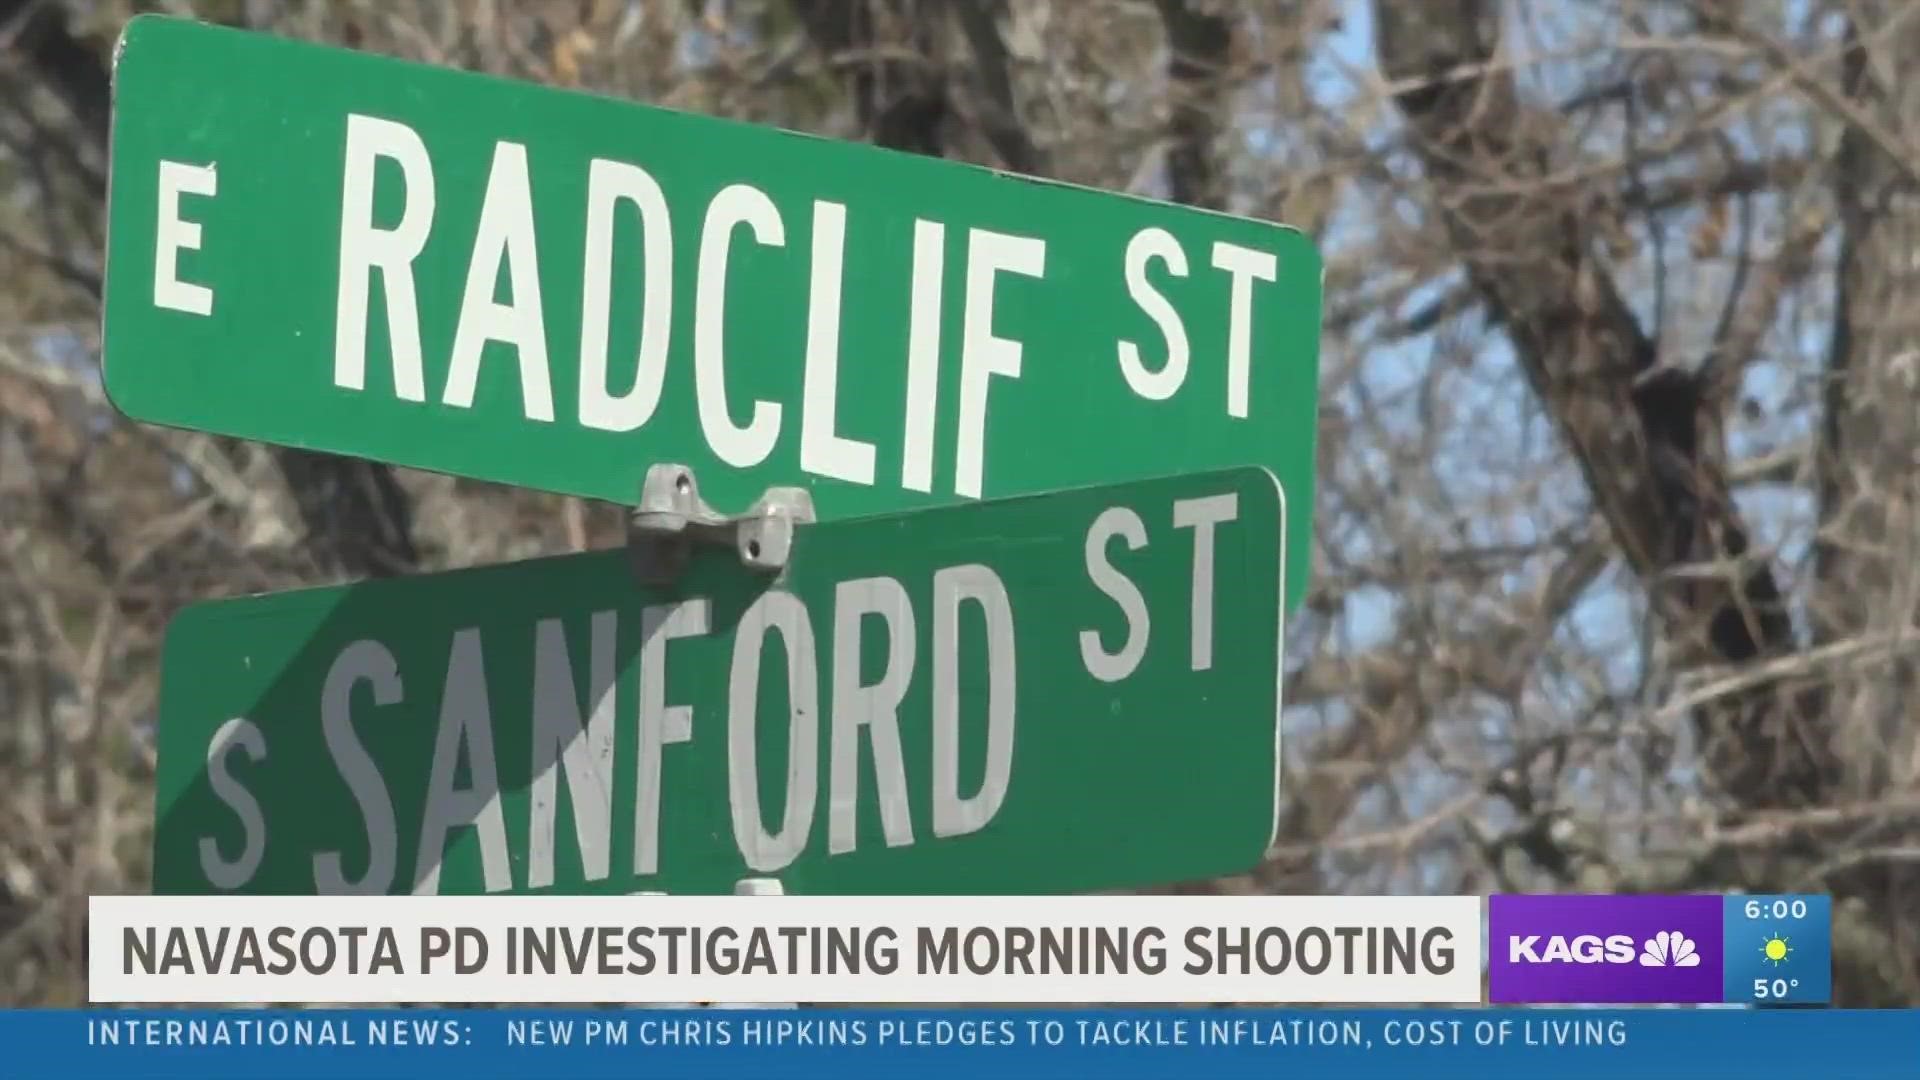 Police are investigating whether the two shootings in the area are connected.